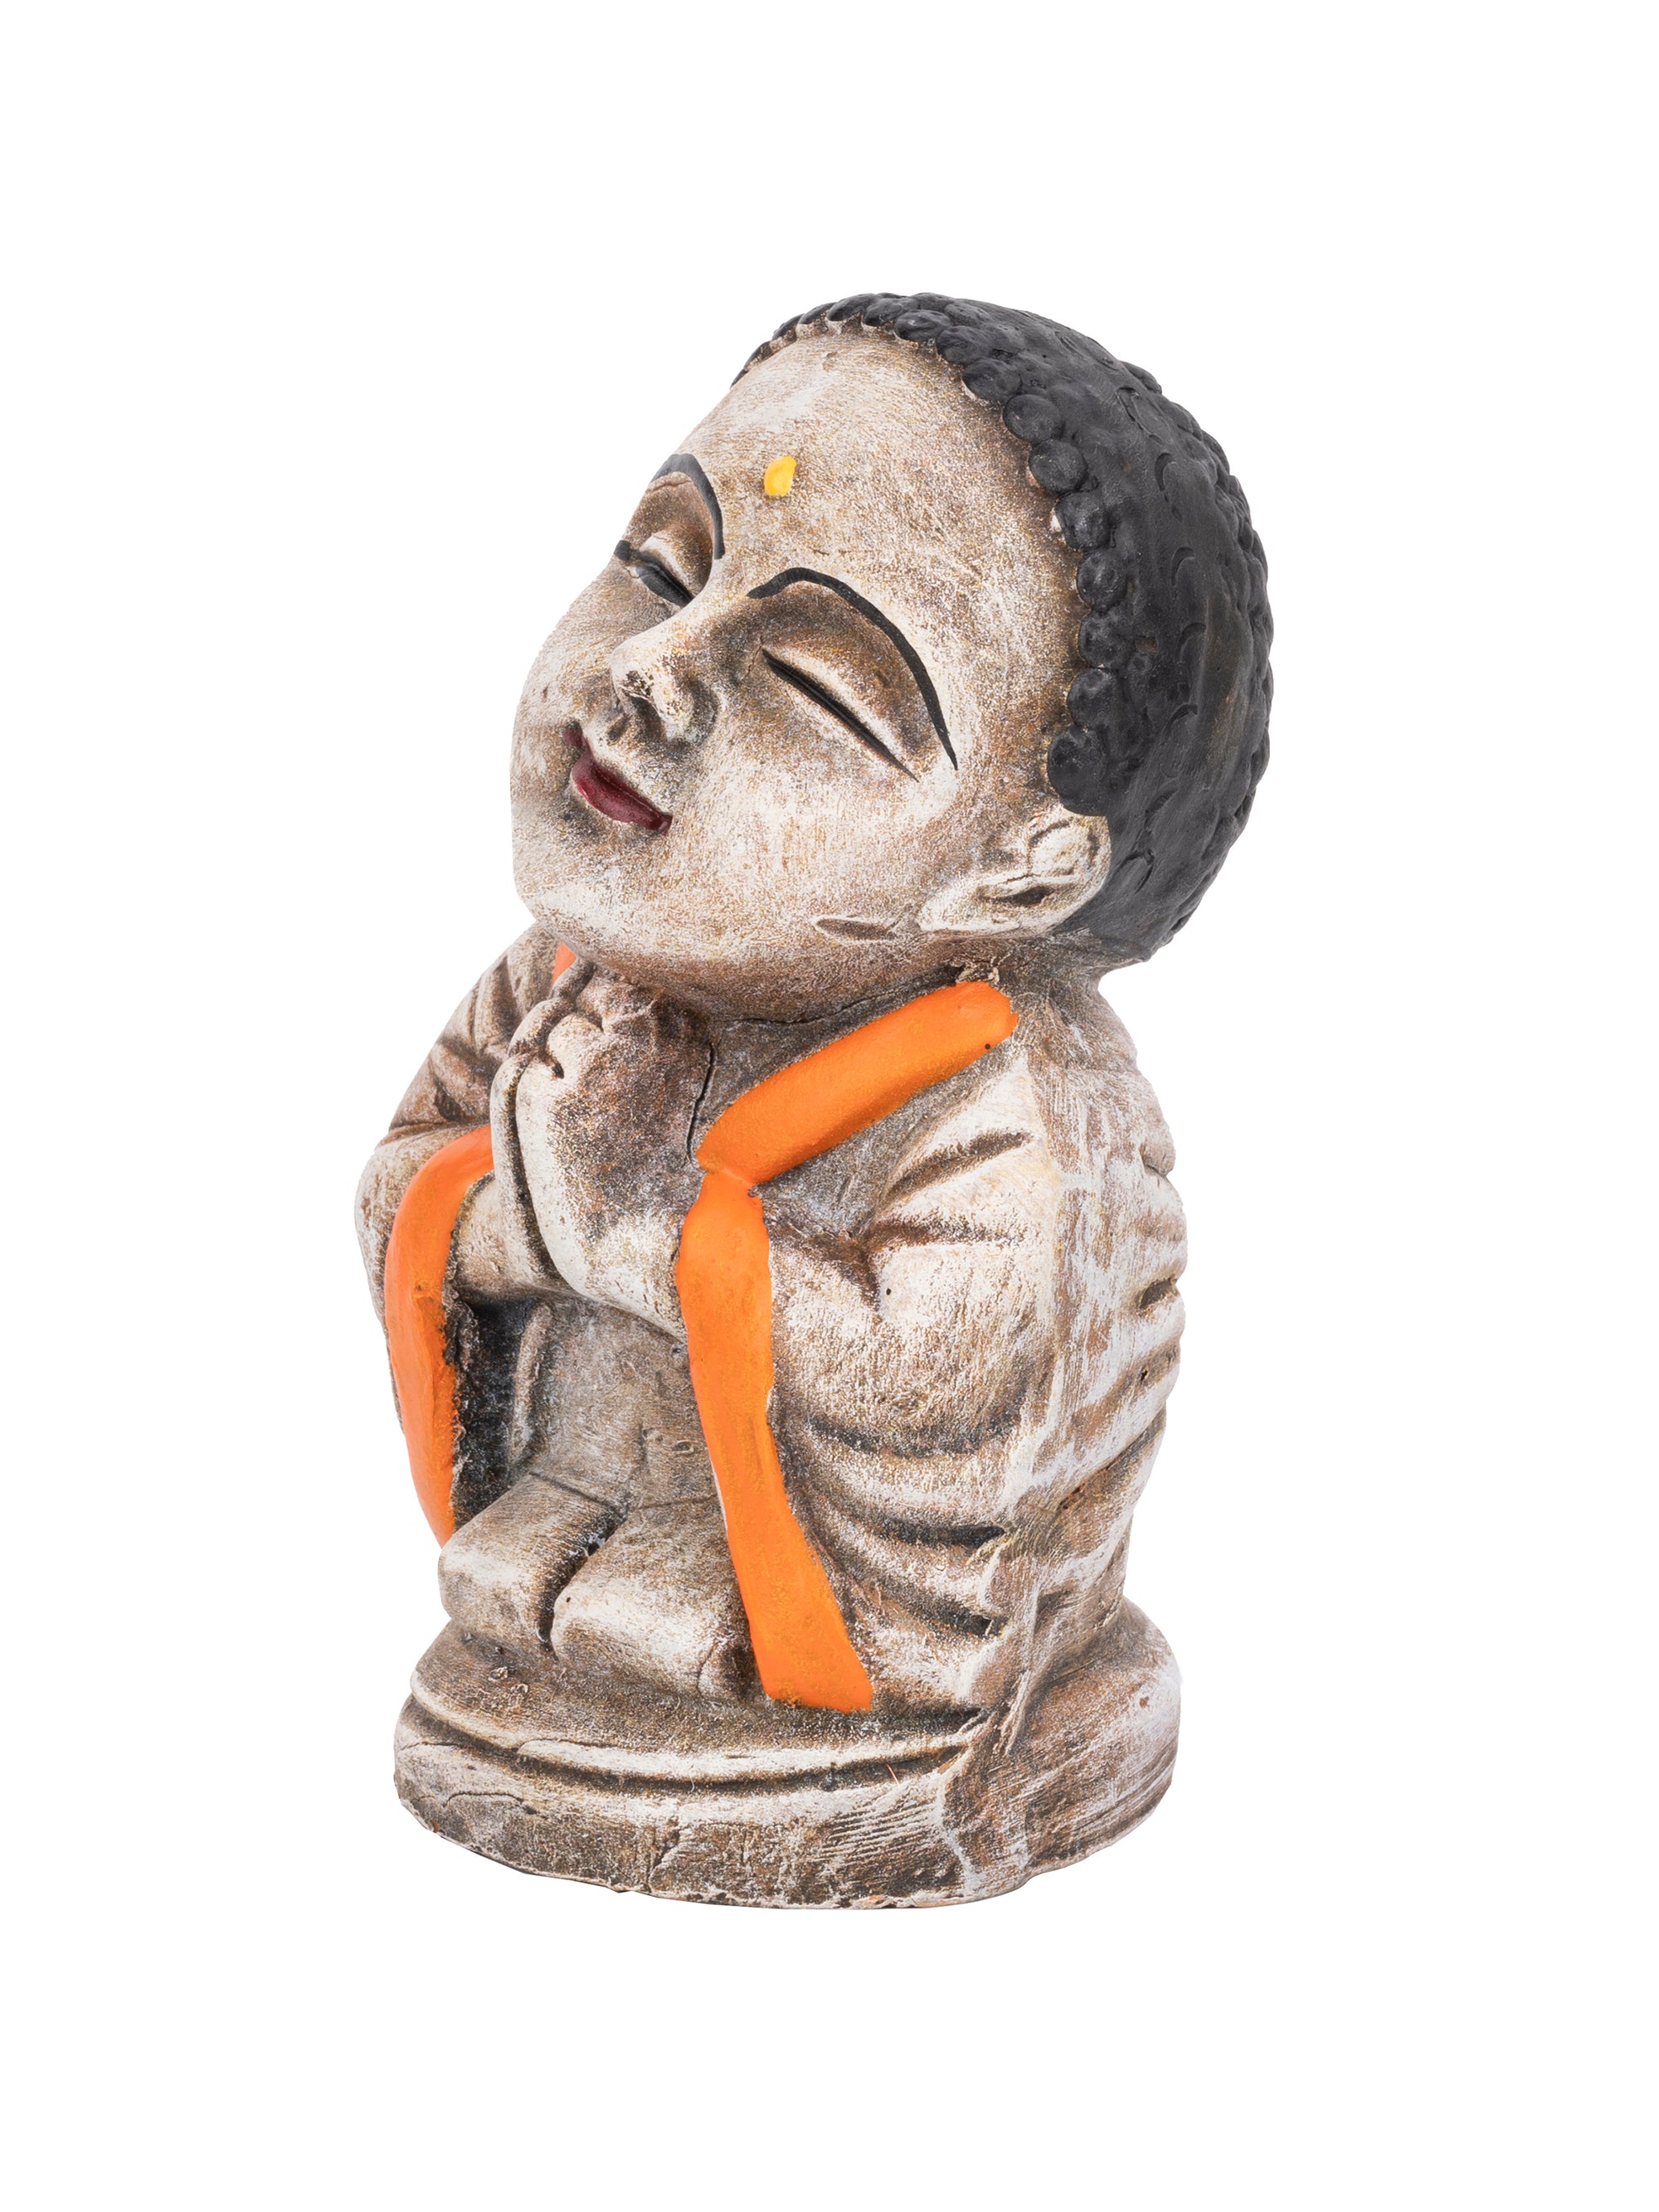 Terracotta Colorful Namaste Buddha Monk, 6 inches height - The Heritage Artifacts